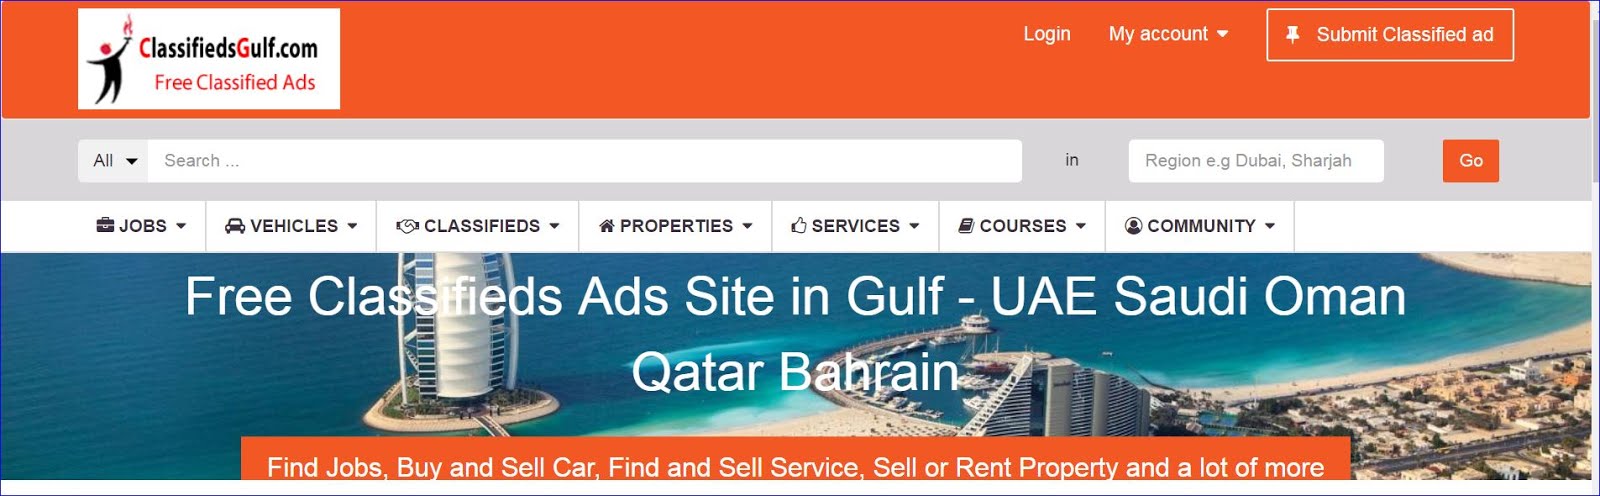 ClassifiedsGulf.com - UAE largest Free Classifieds Ads. Buy and Sell anything free